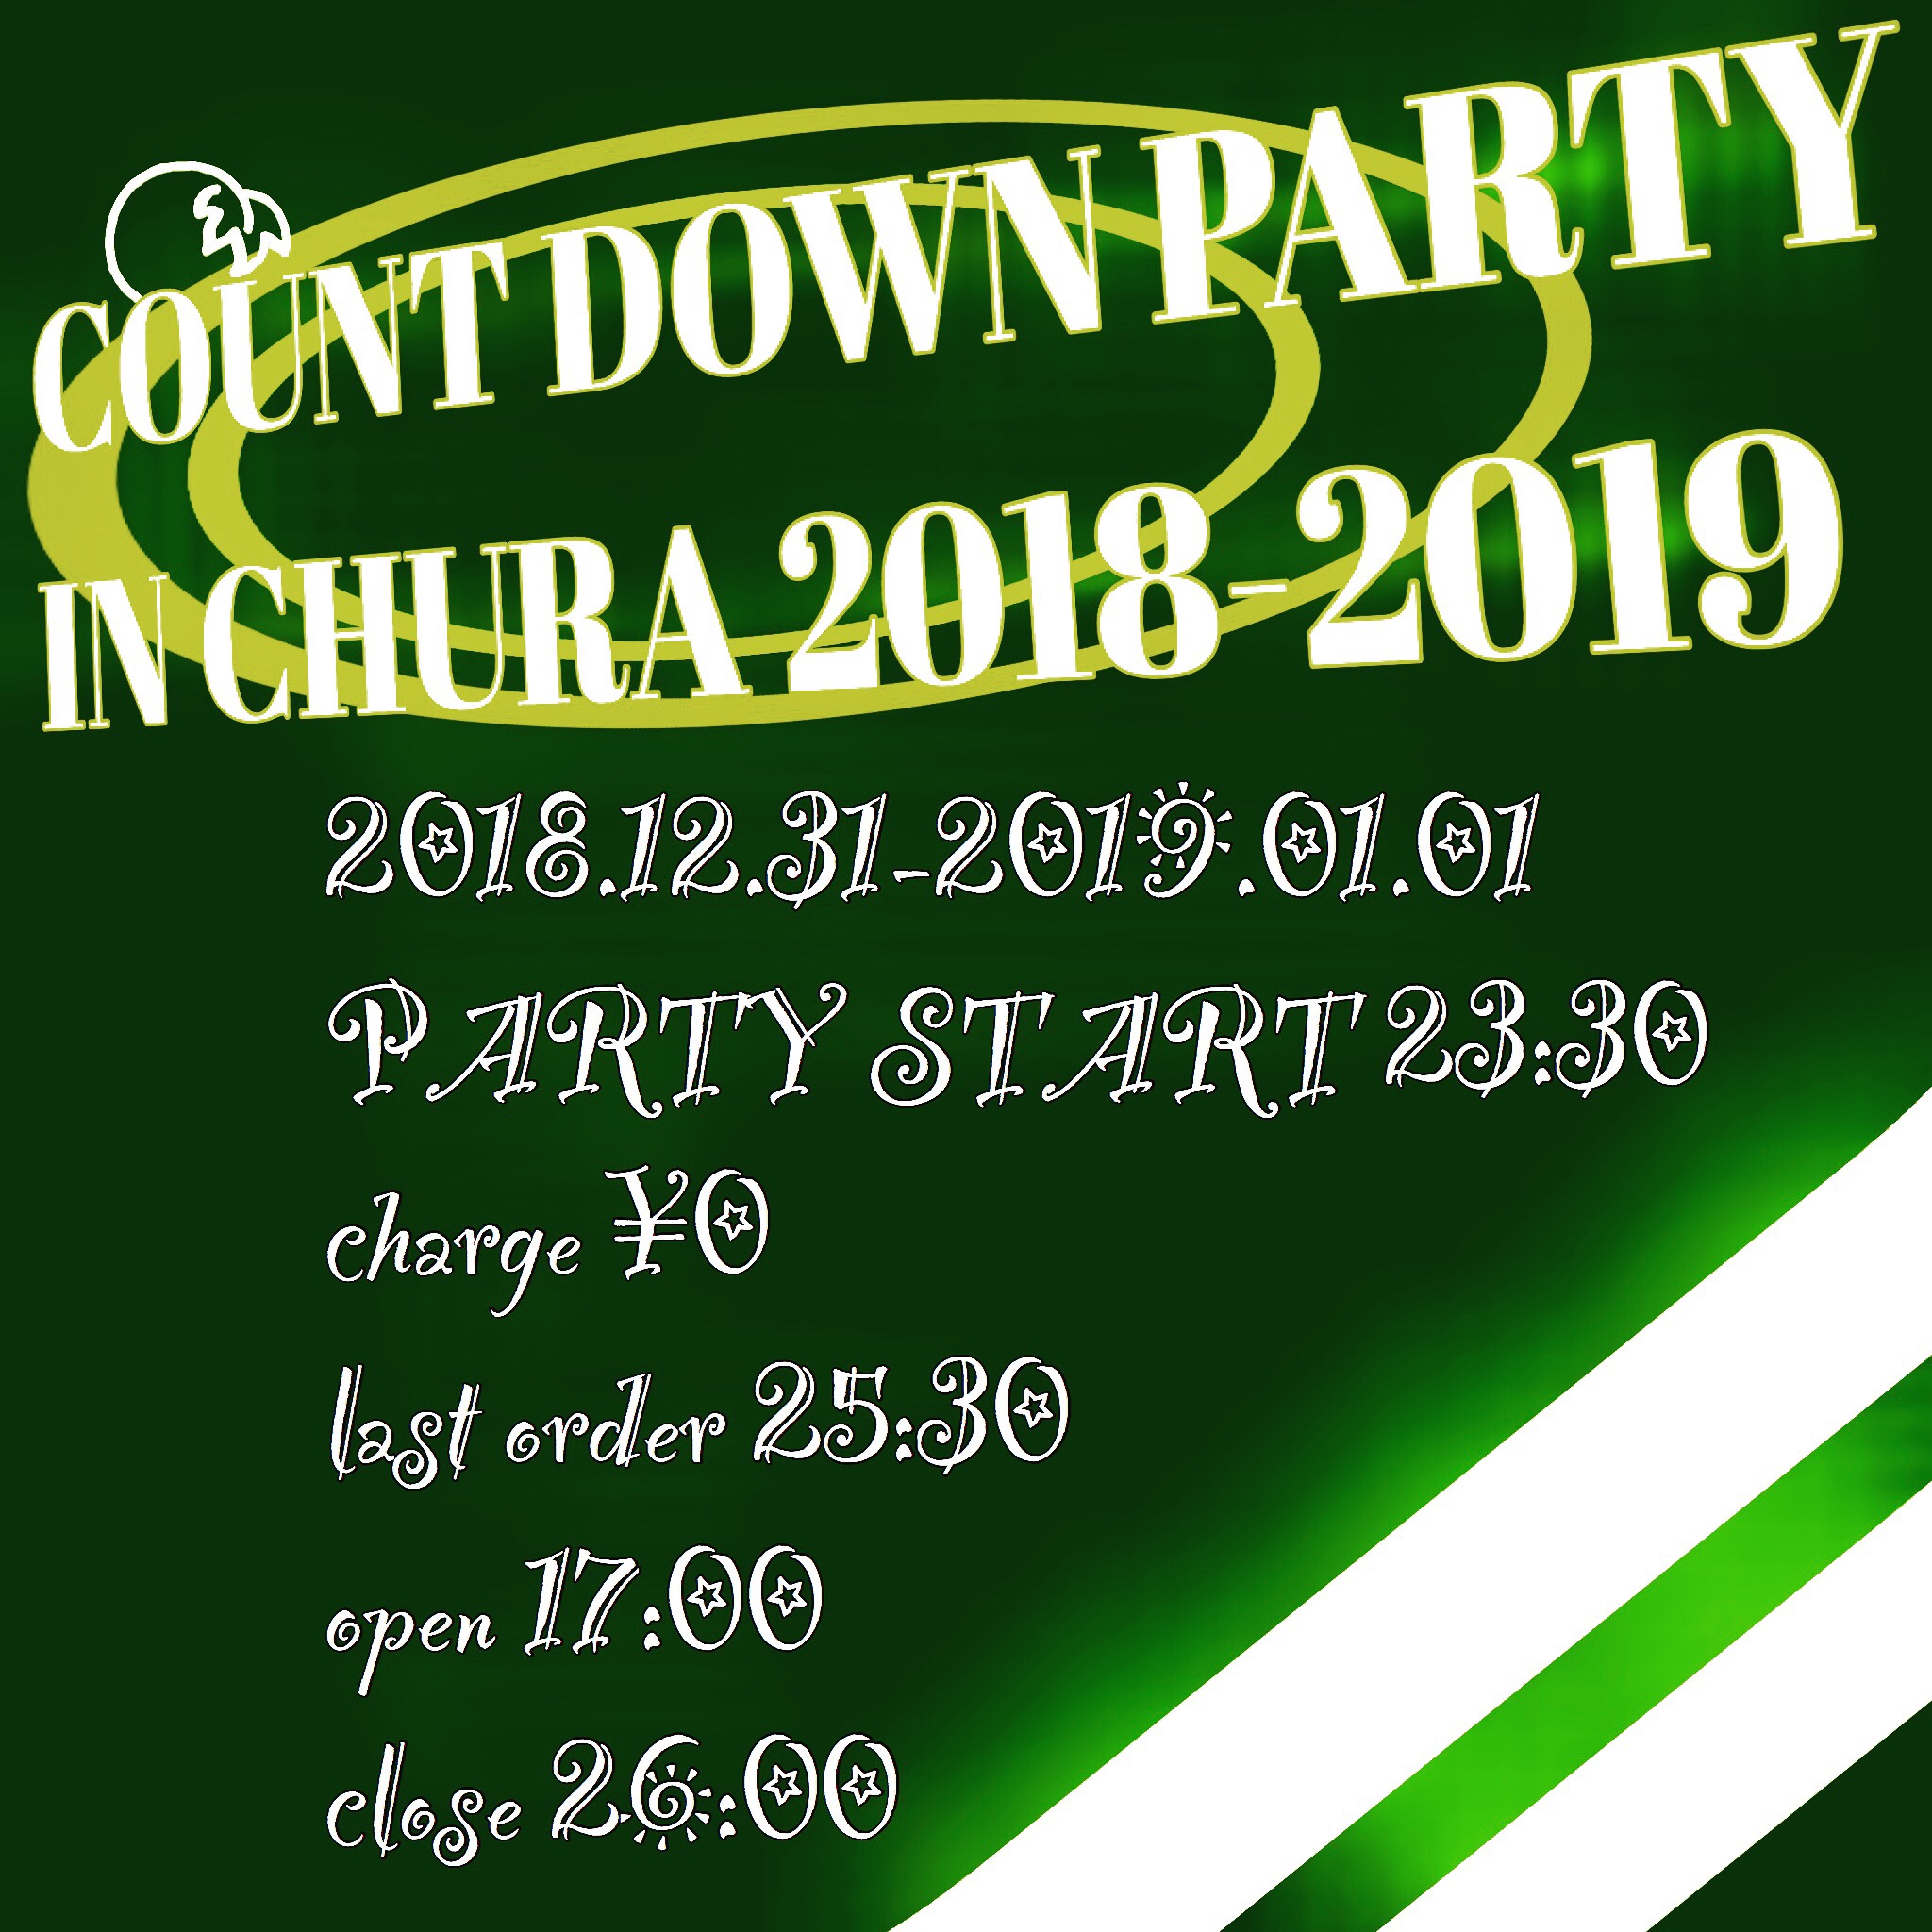 COUNT DOWN PARTY  IN CHURA 2018-2019